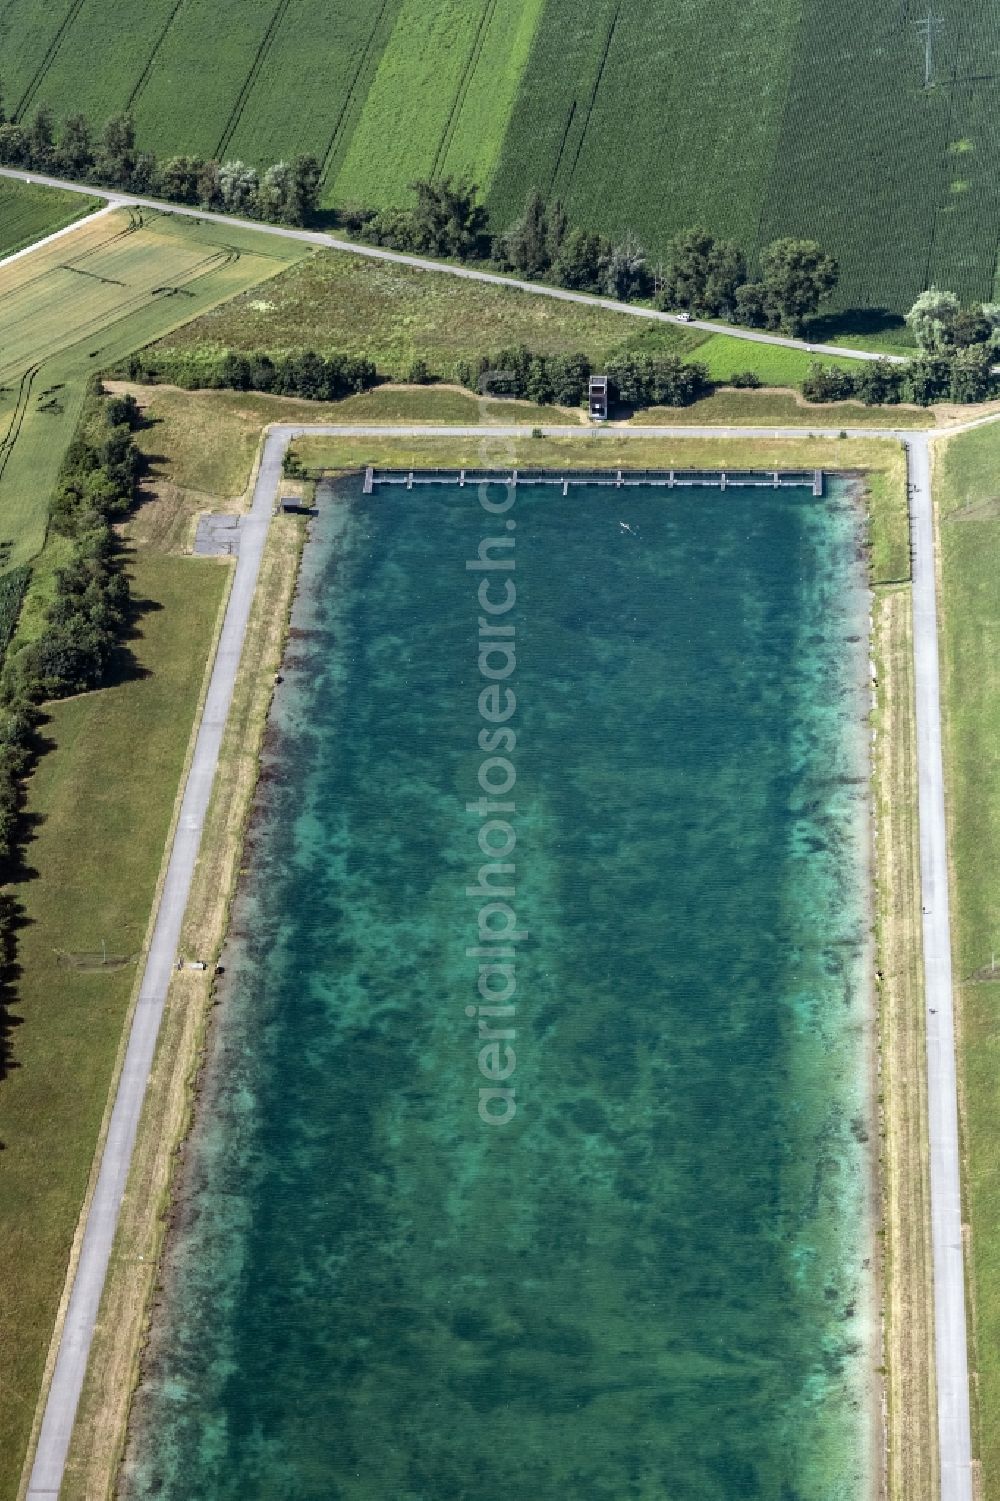 Aerial photograph Oberschleißheim - Sports area Regatta facility of the performance center for rowing and canoeing in the district Feldmoching-Hasenbergl in Oberschleissheim in the state Bavaria, Germany